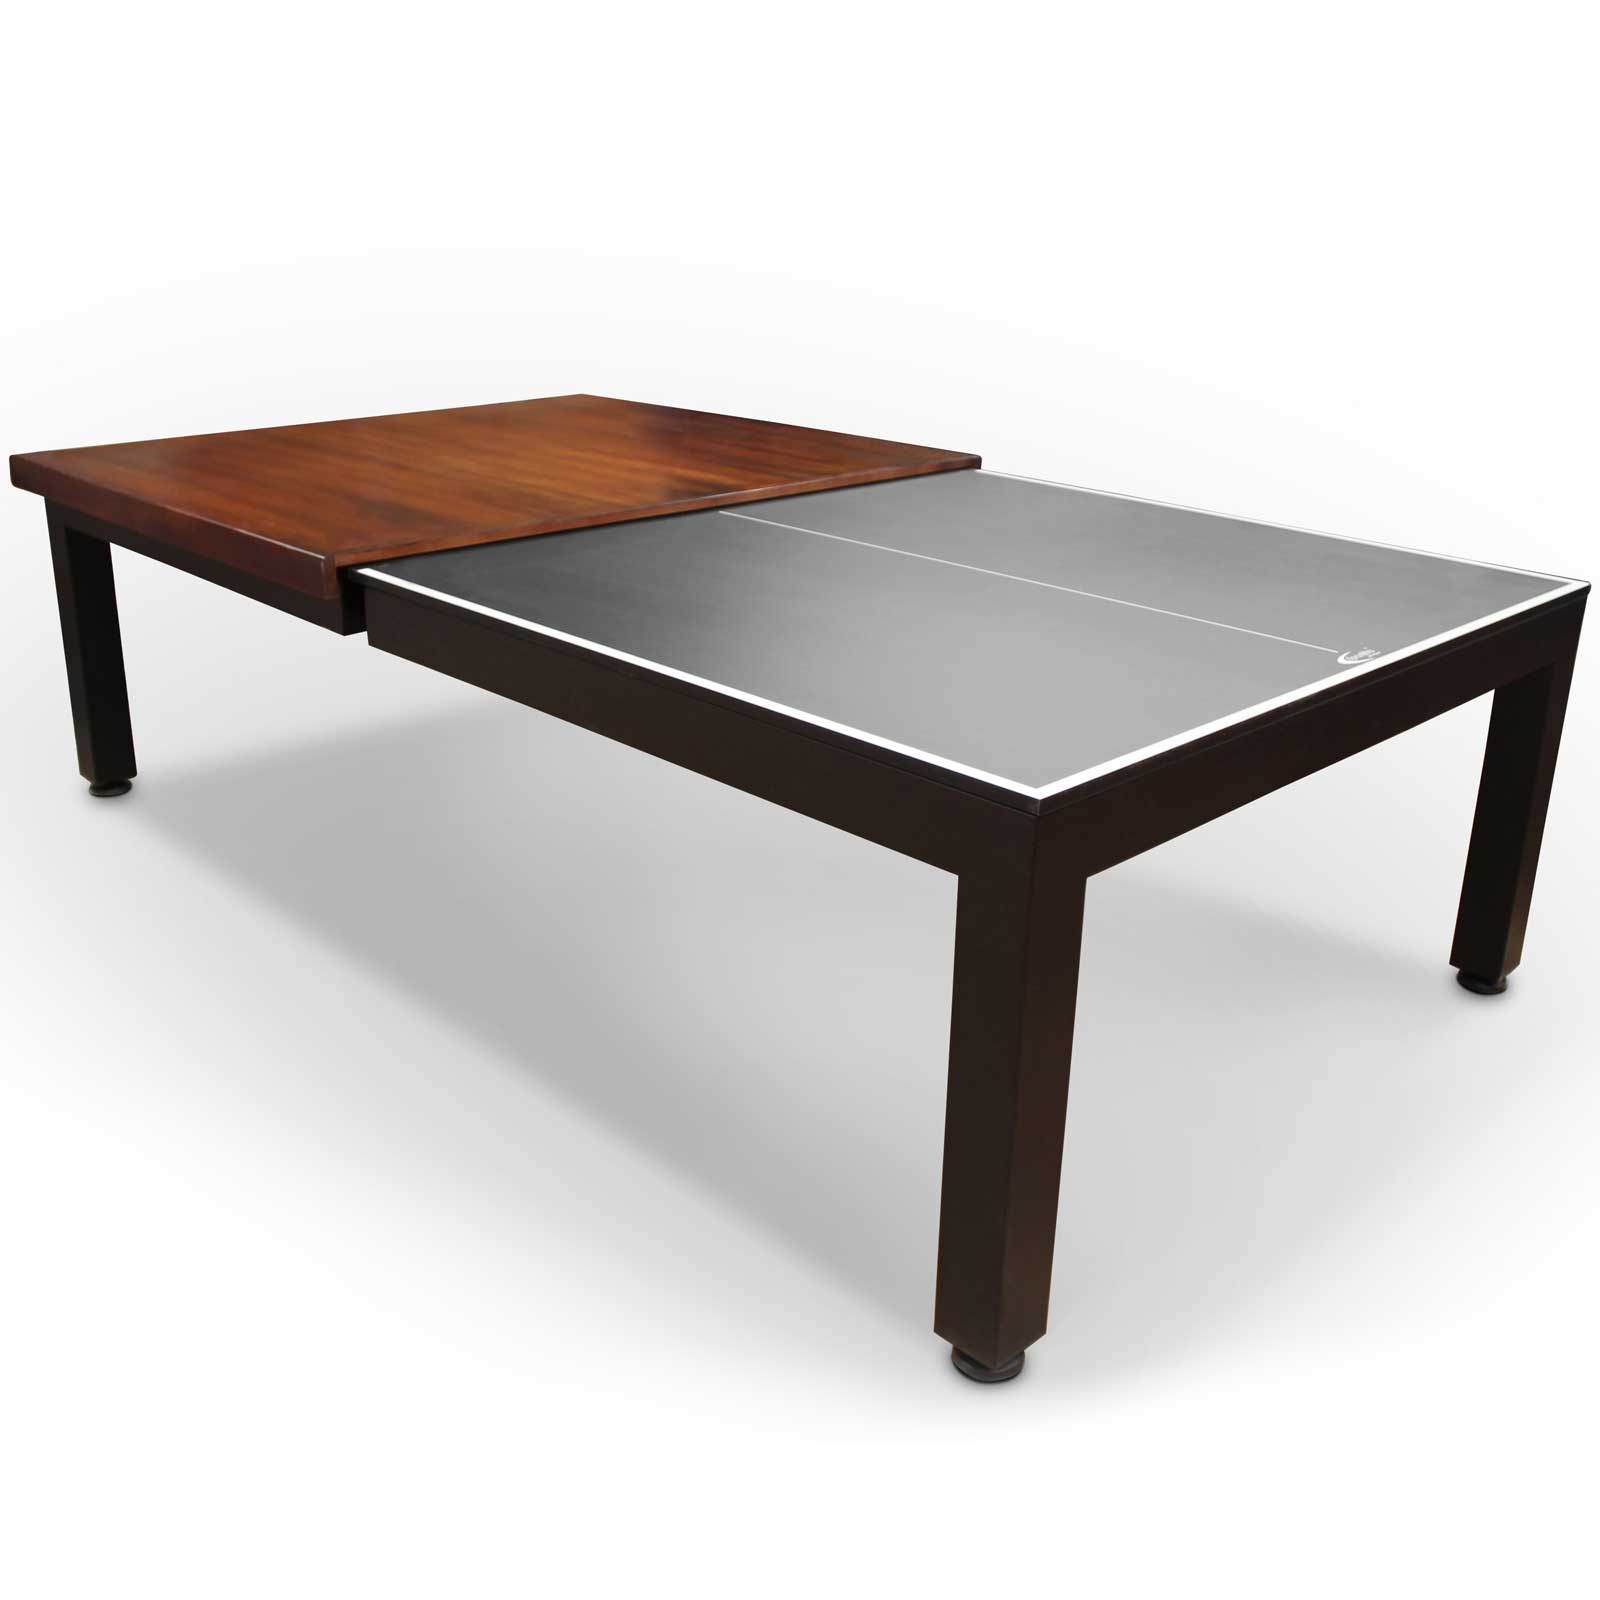 Challenger (Dining Table Style) Table Tennis Ping Pong Table